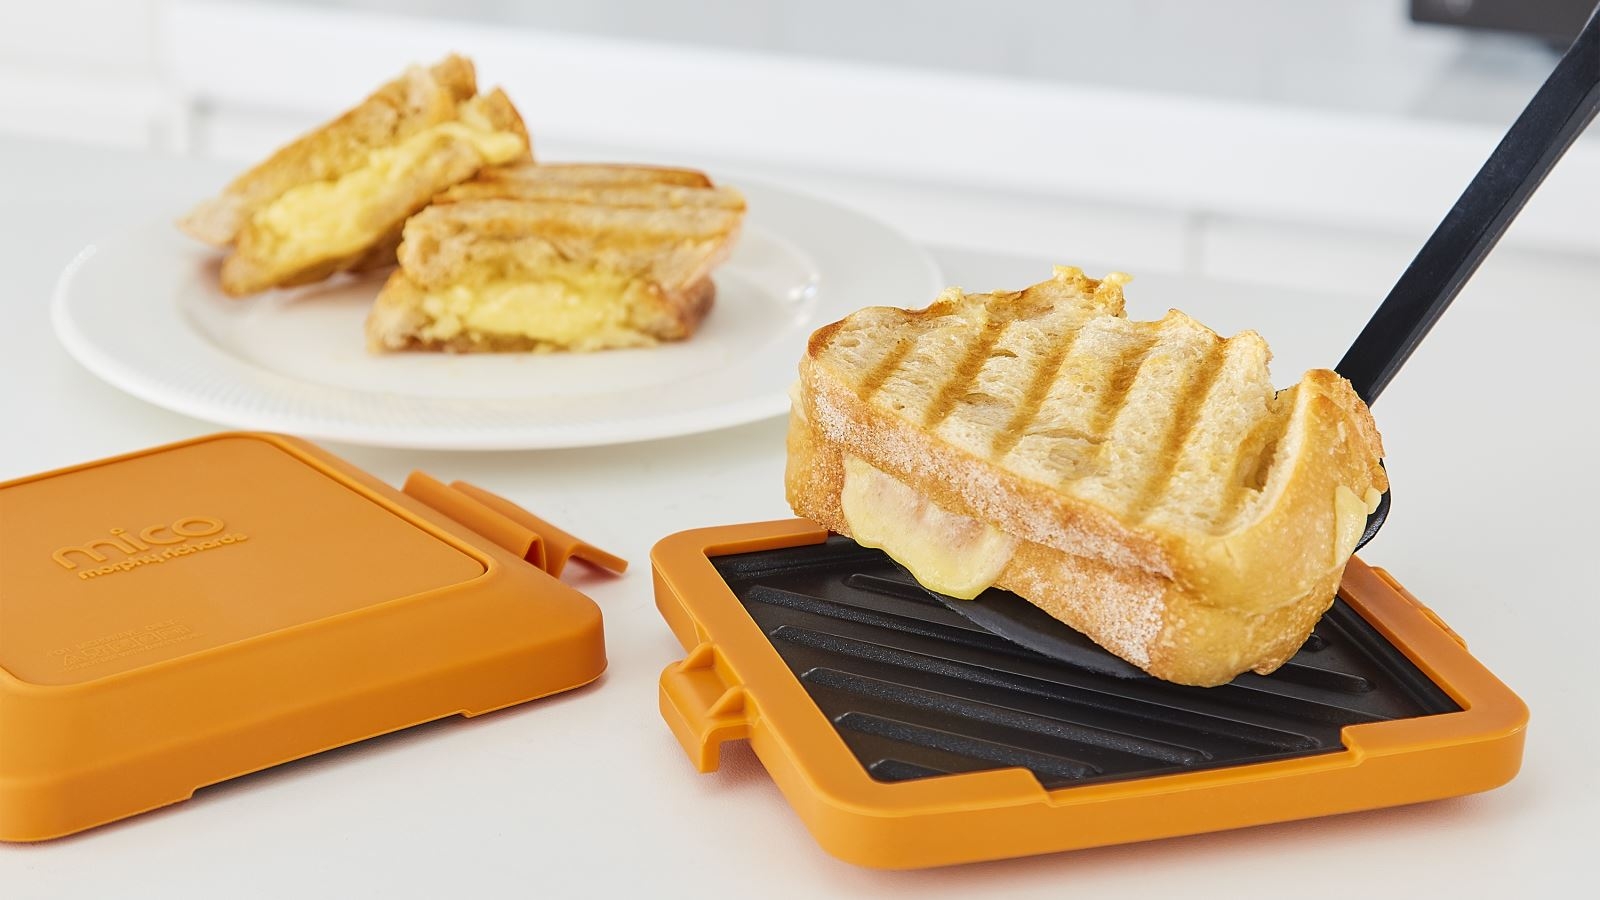 Big W Microwave Toastie Maker: Why Australians can't get enough of this  'game-changing' $29 kitchen gadget